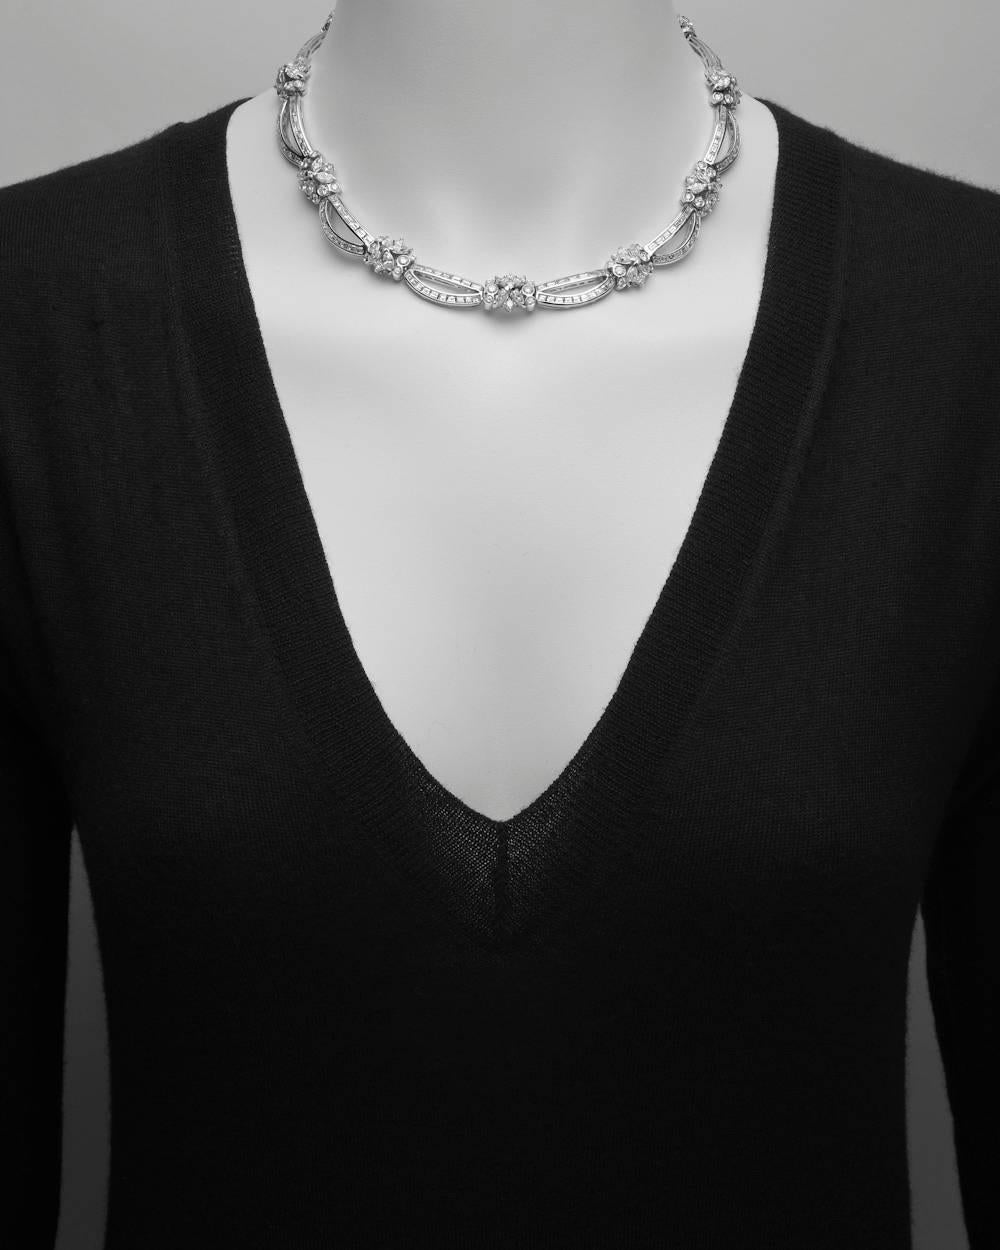 Diamond collar necklace, composed of baguette-cut diamond 'draped'-style links alternating with round-cut and marquise-shaped diamond cluster links, in 18k white gold. Baguette-cut diamonds weighing approximately 13.08 total carats, marquise-shaped